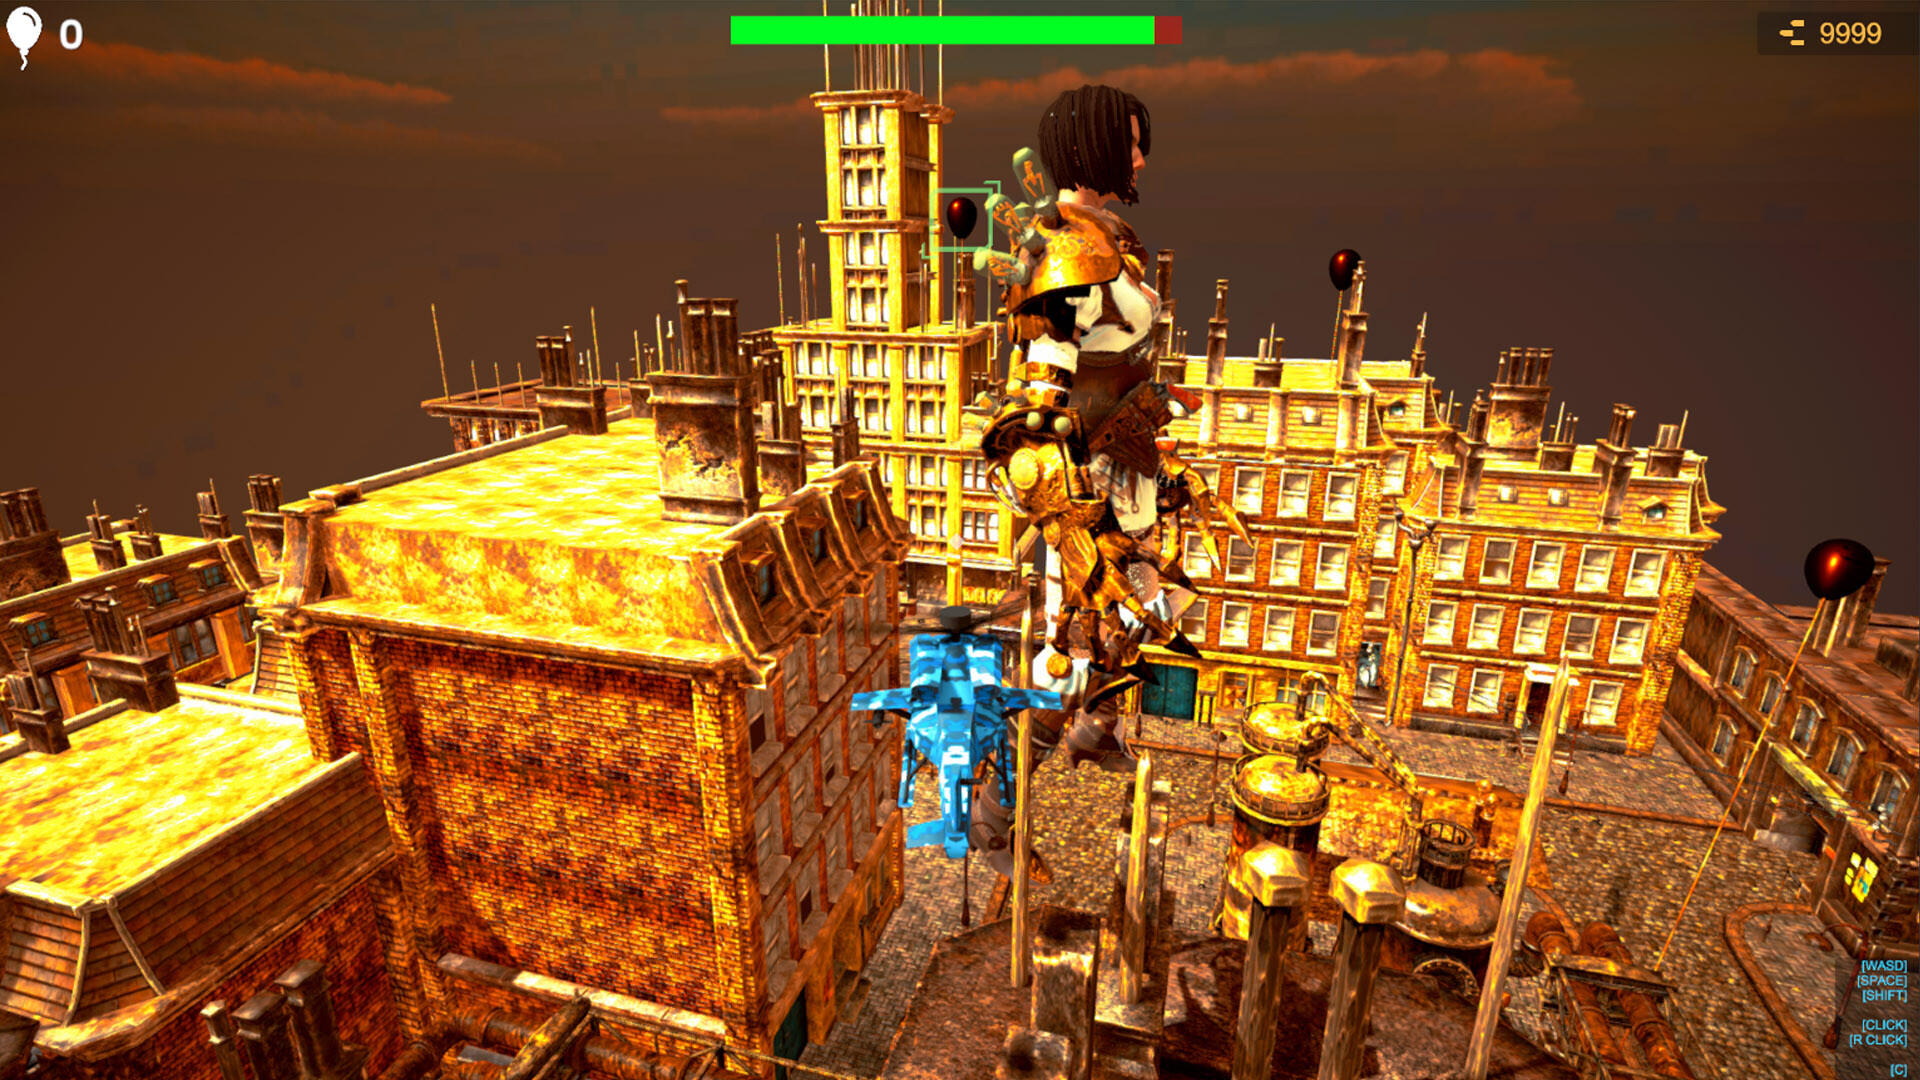 Screenshot of Save Giant Girl from monsters 4